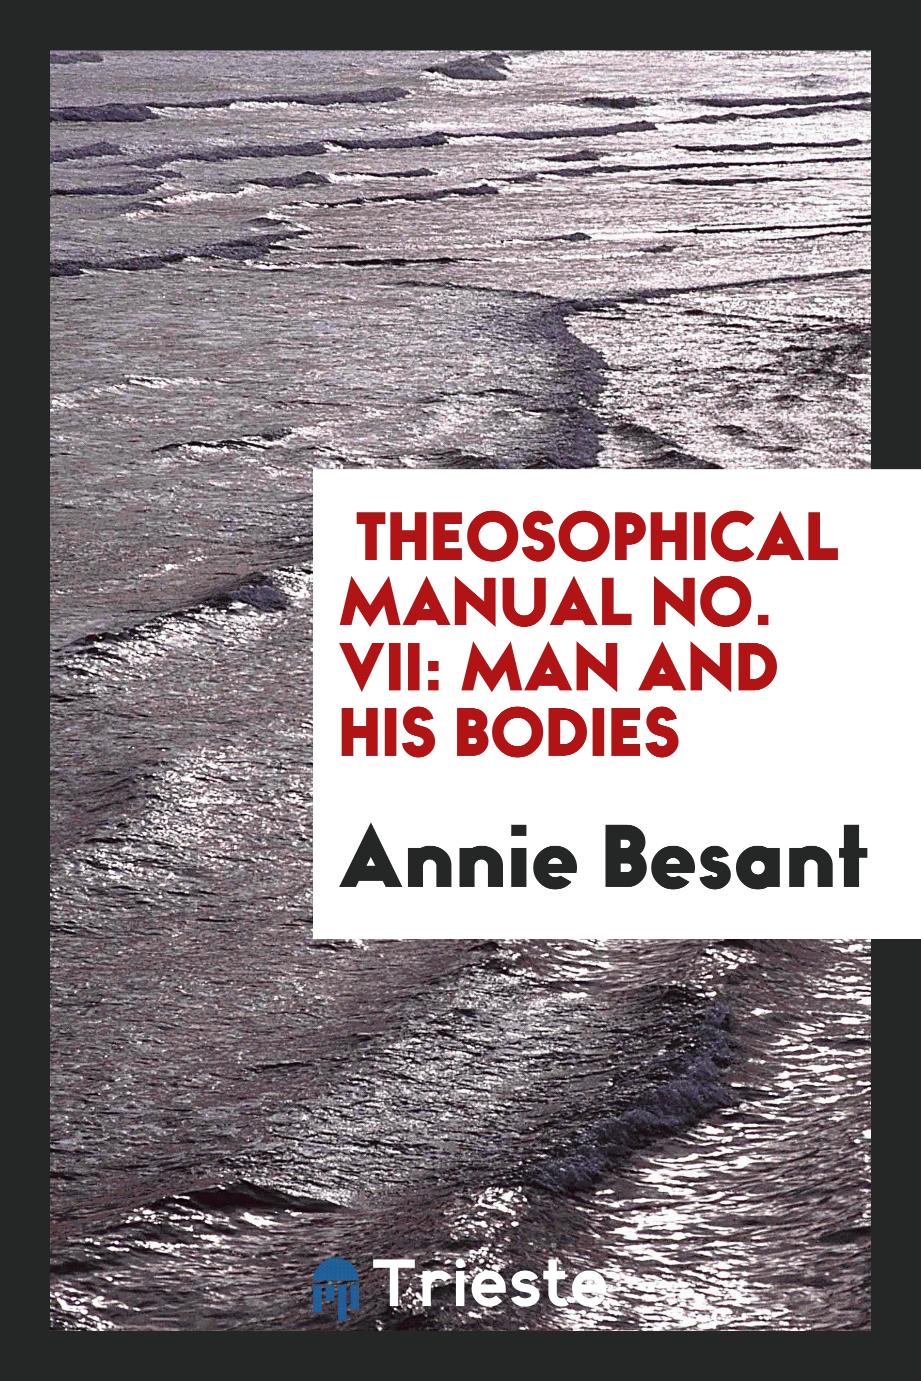 Theosophical Manual No. VII: Man and His Bodies